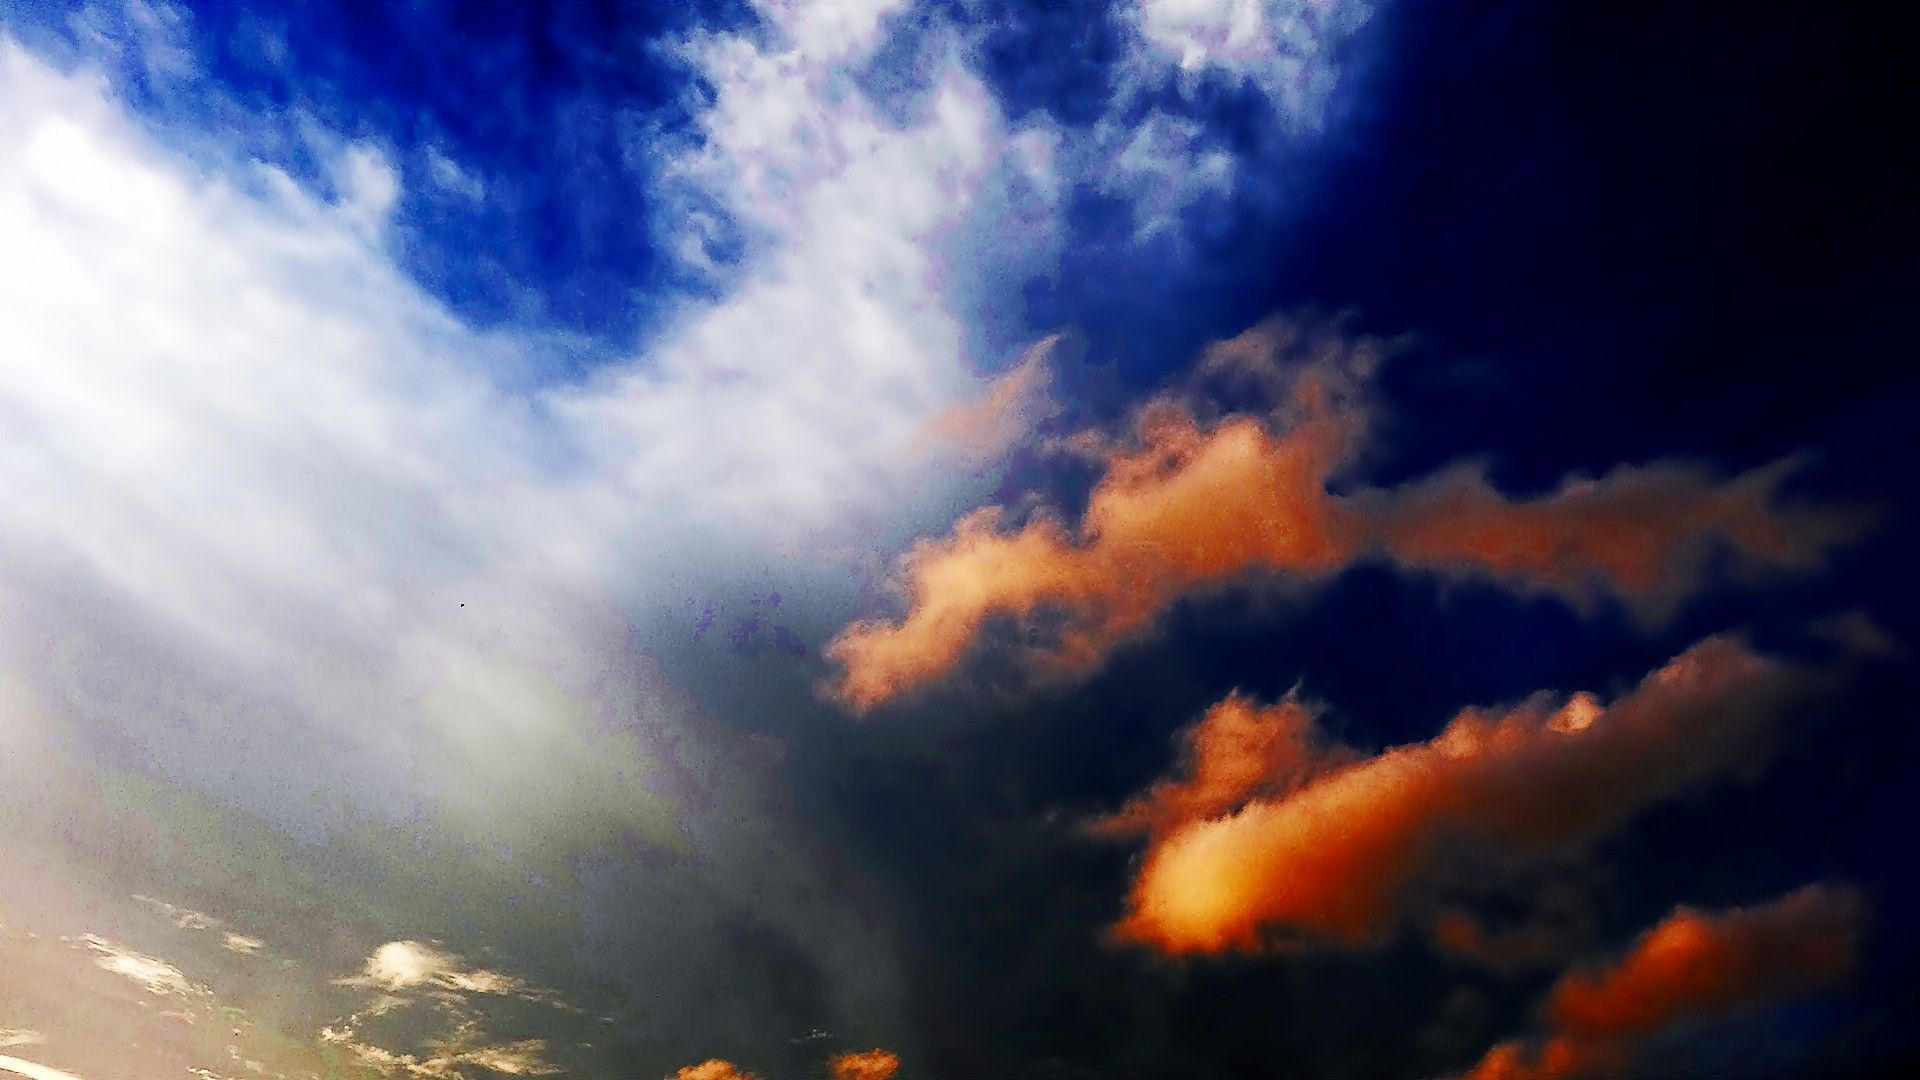 White and yellow clouds wallpaper and image, picture, photo